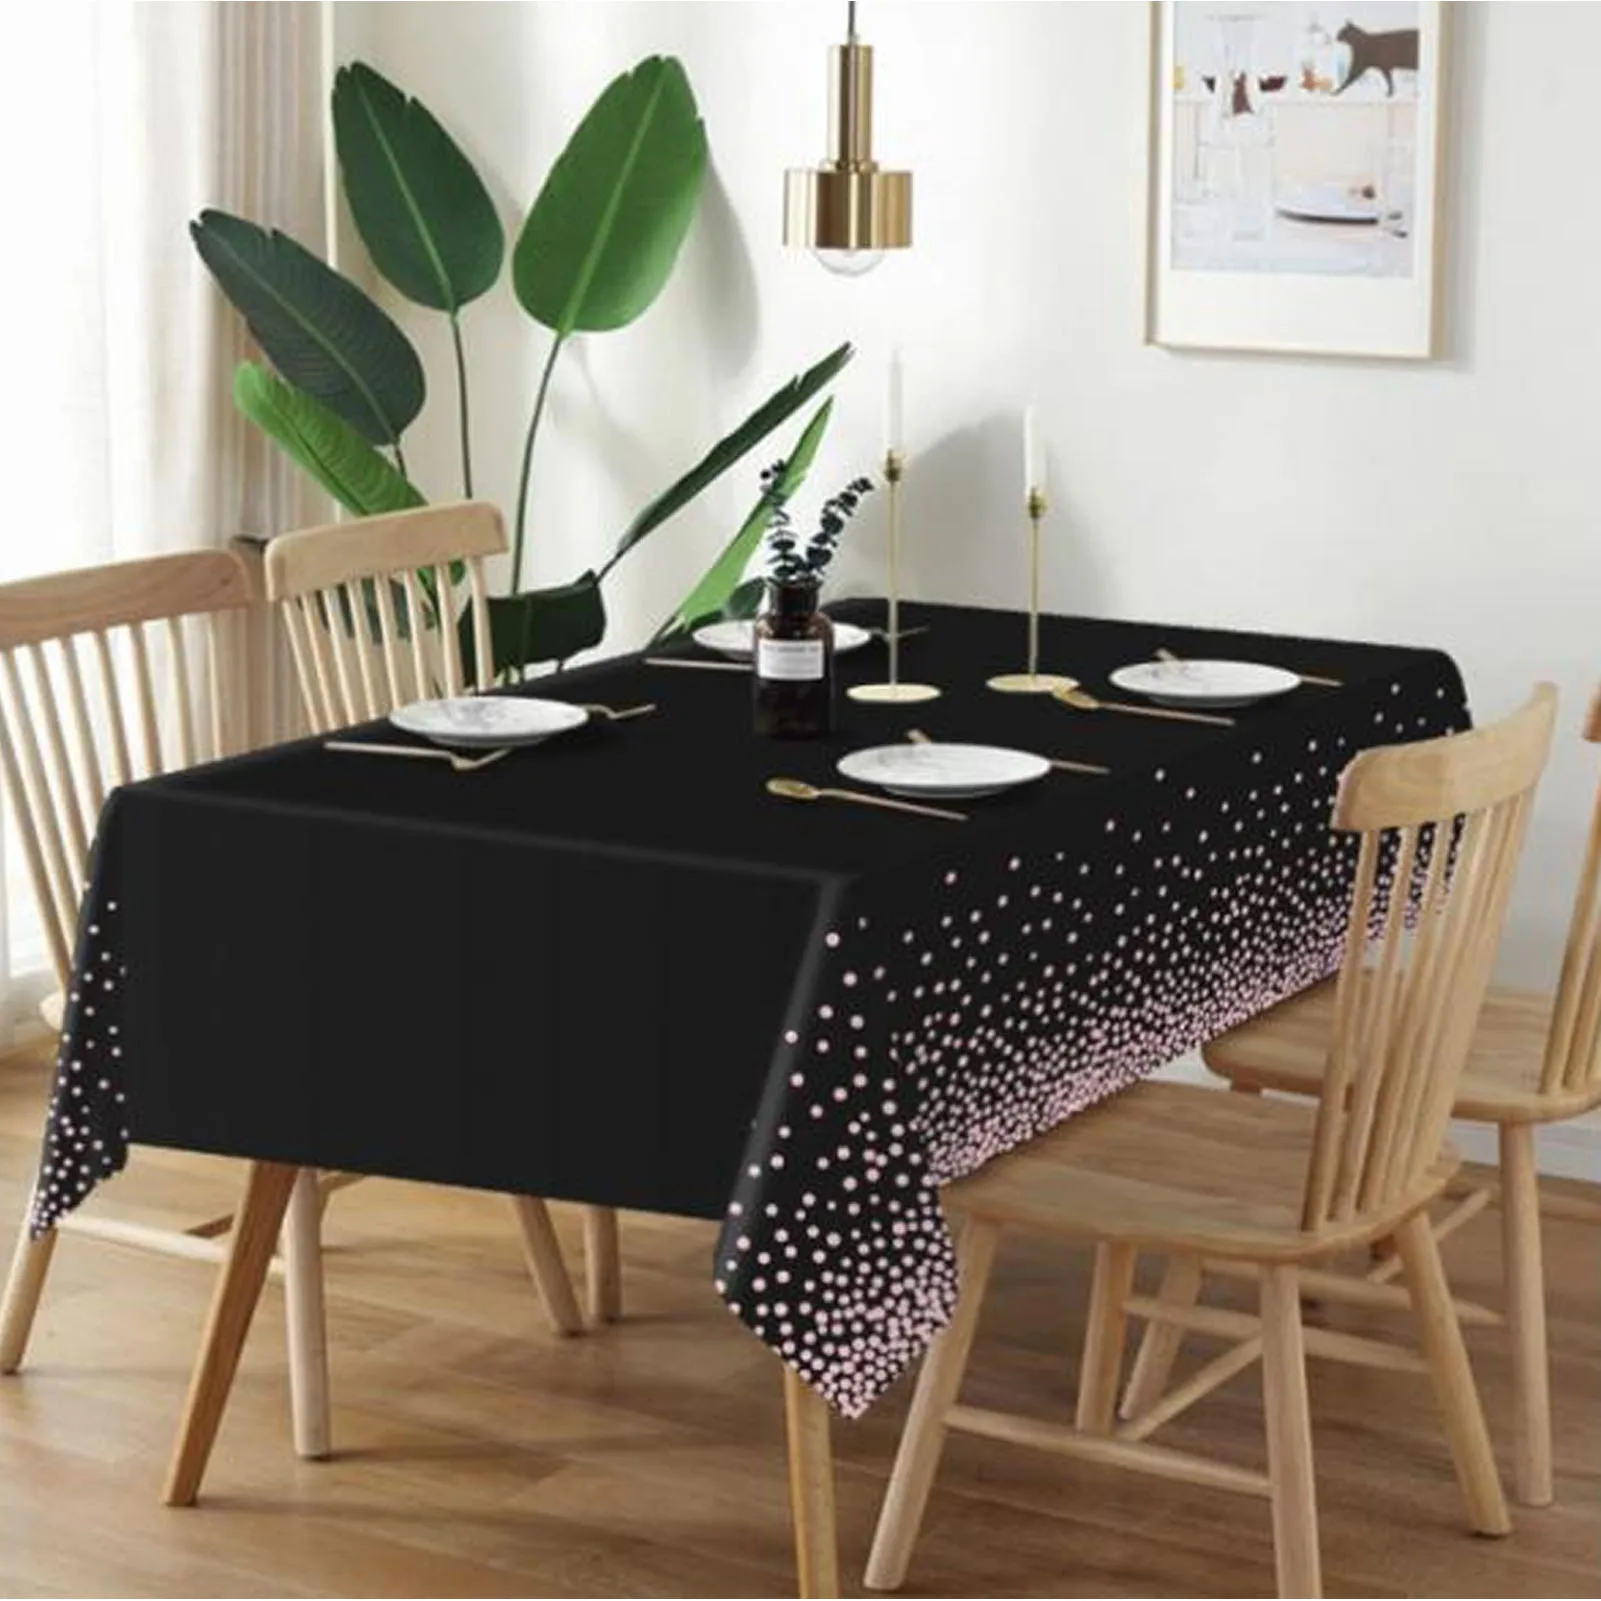 

3 Pcs 54x108 inch Plastic Tablecloth Waterproof Oil Resistant Reusable Dot Pattern Table Cloth for Birthday Party Banquet Decor